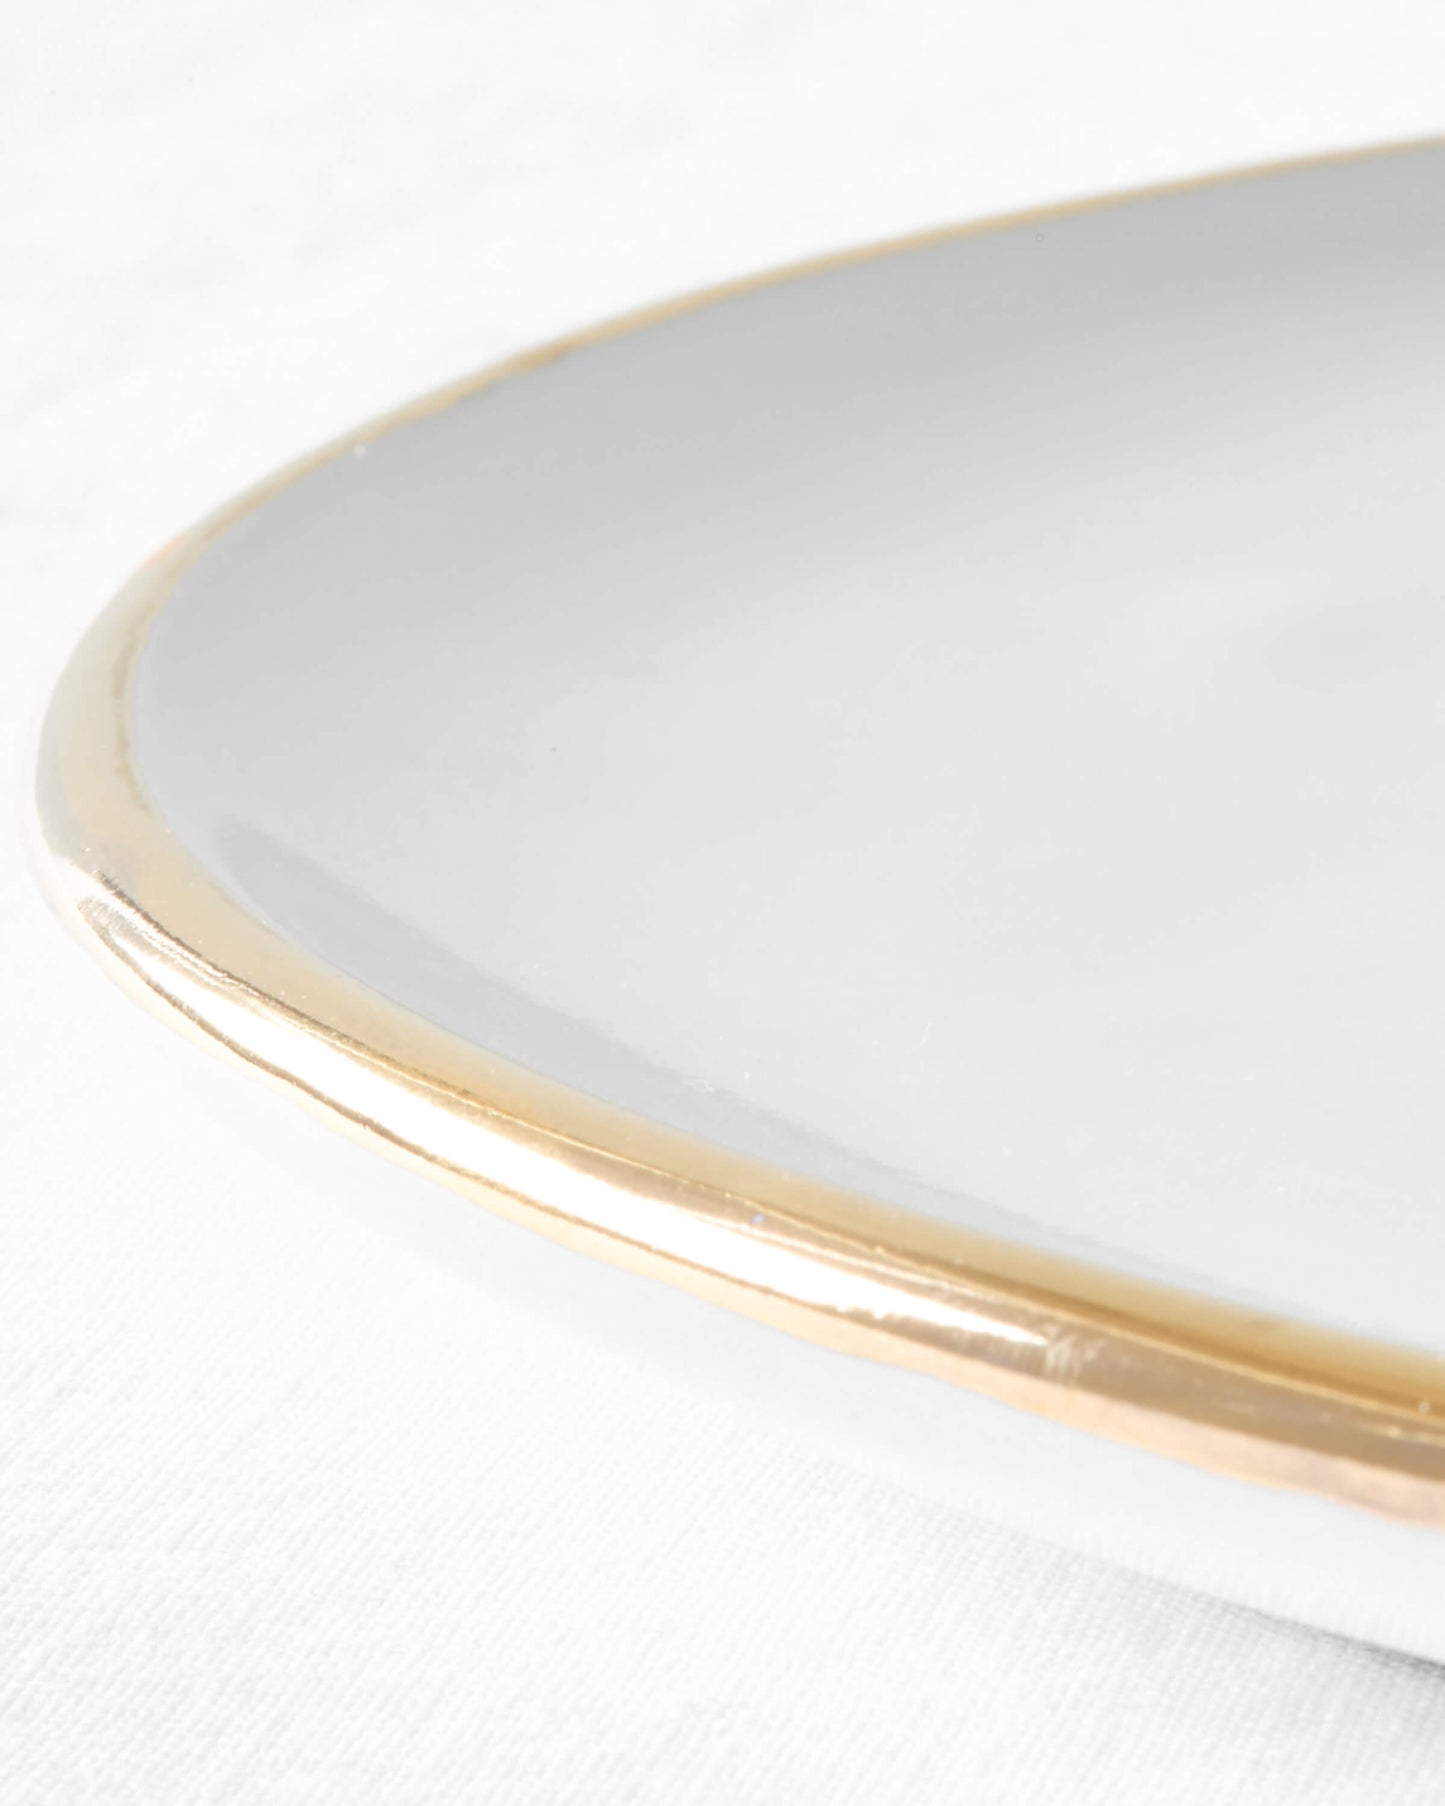 
                  
                    Edge detail close-up of Fez Gold-Rimmed Salad Plate by Fairkind.
                  
                